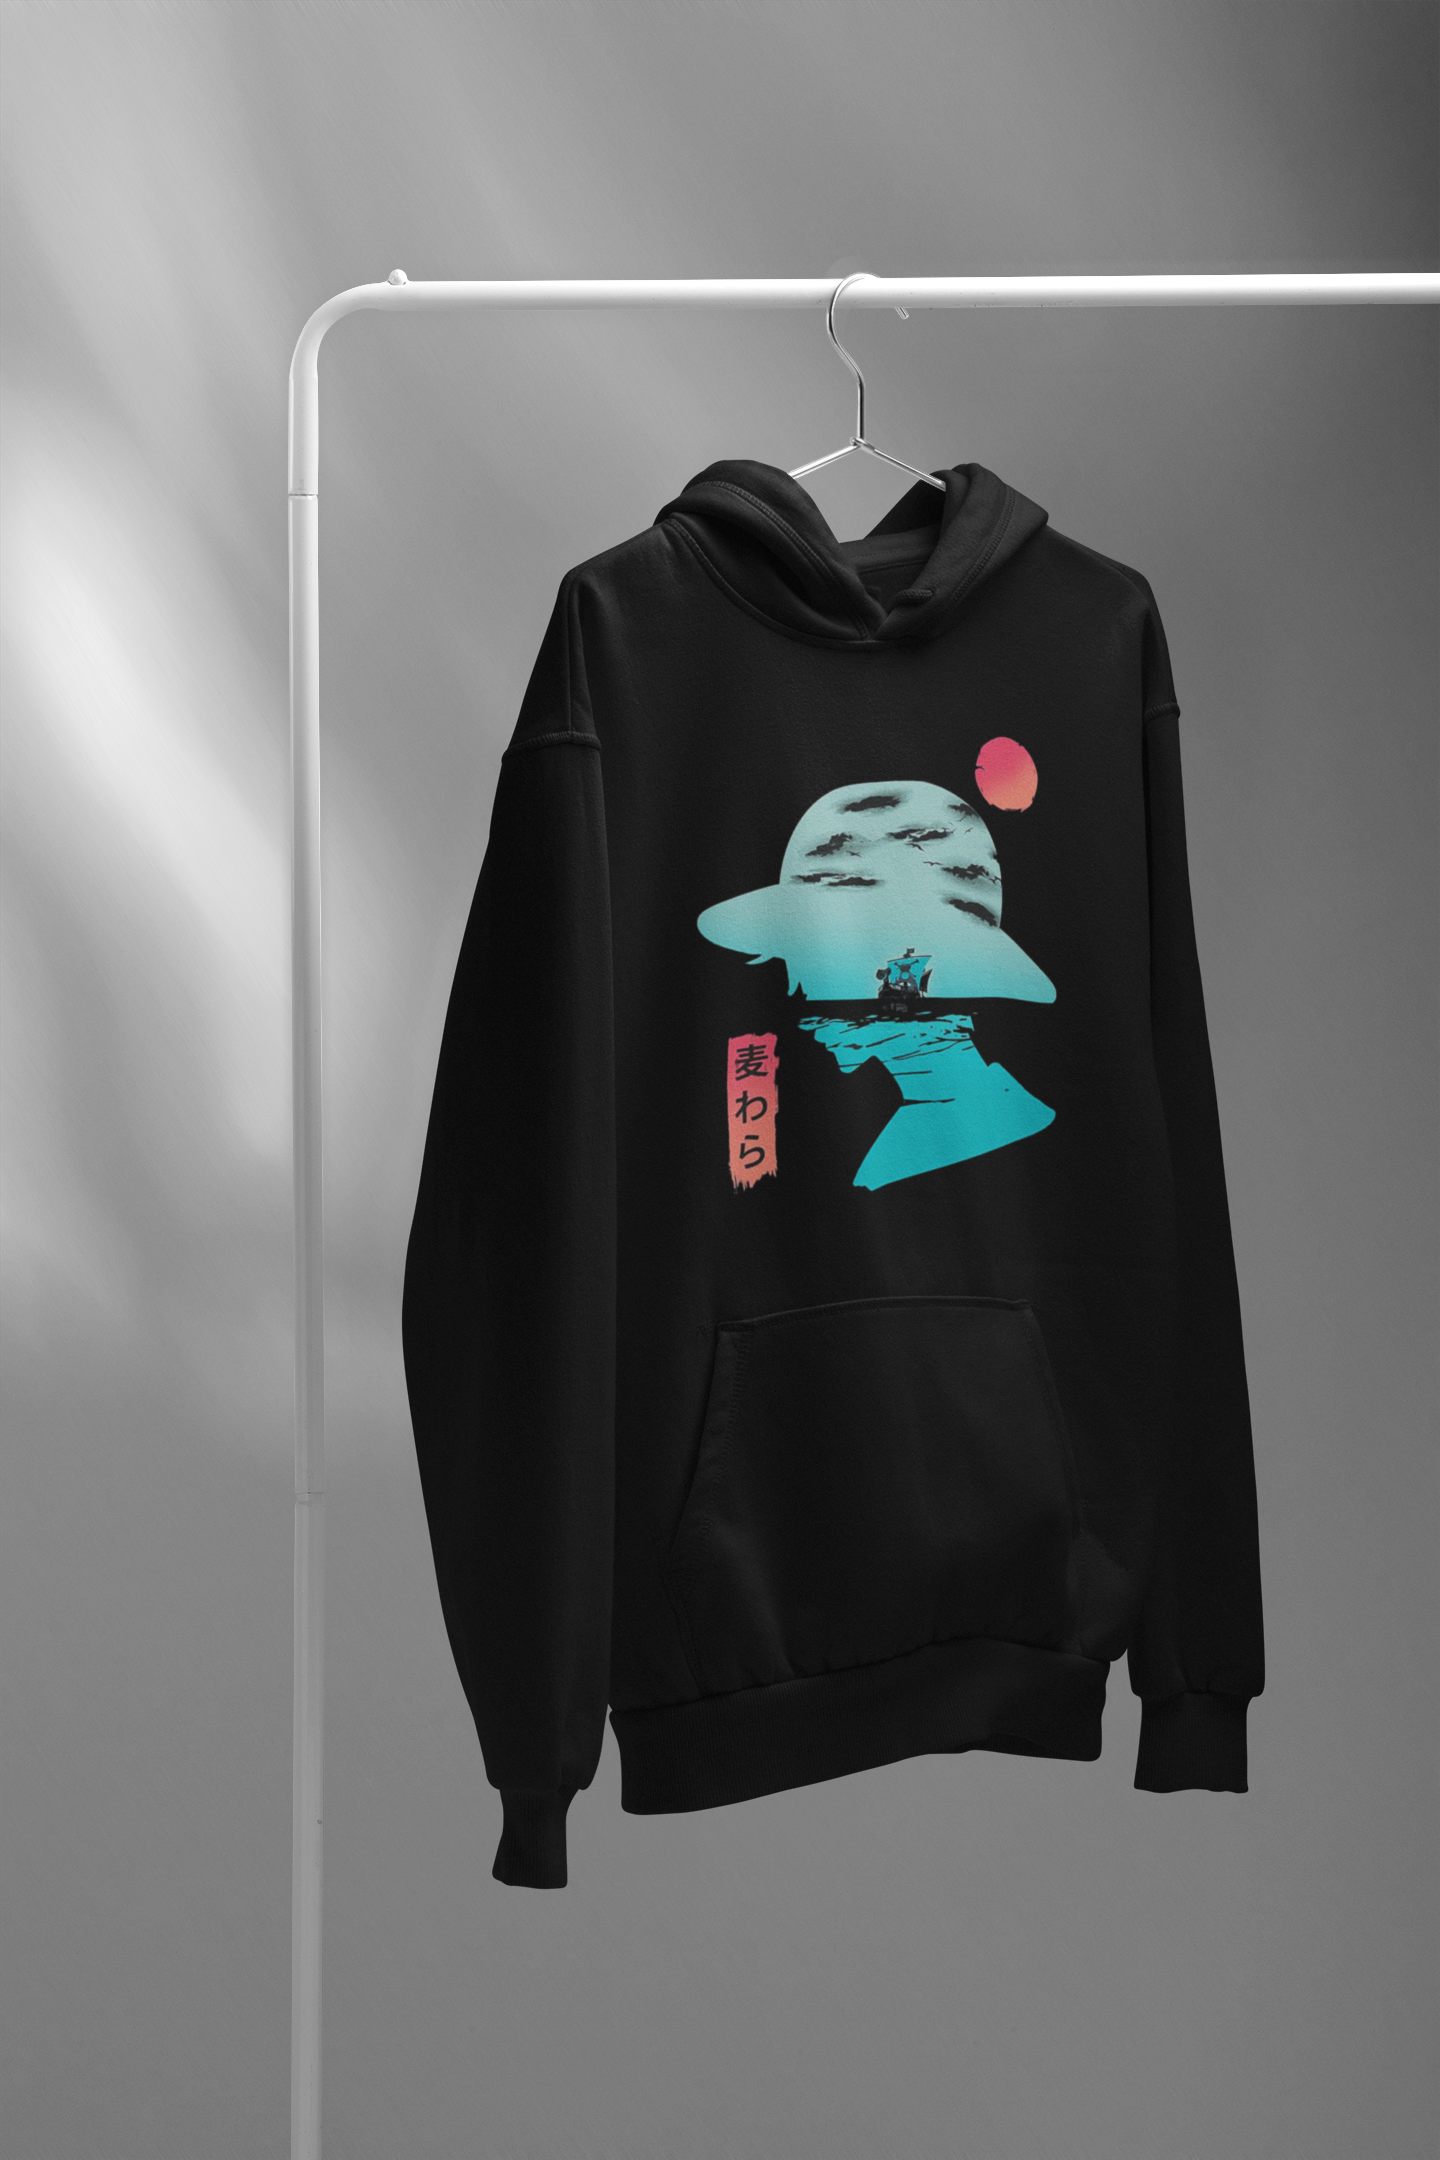 Sailing Day- One Piece: Monkey D Luffy- WINTER HOODIES